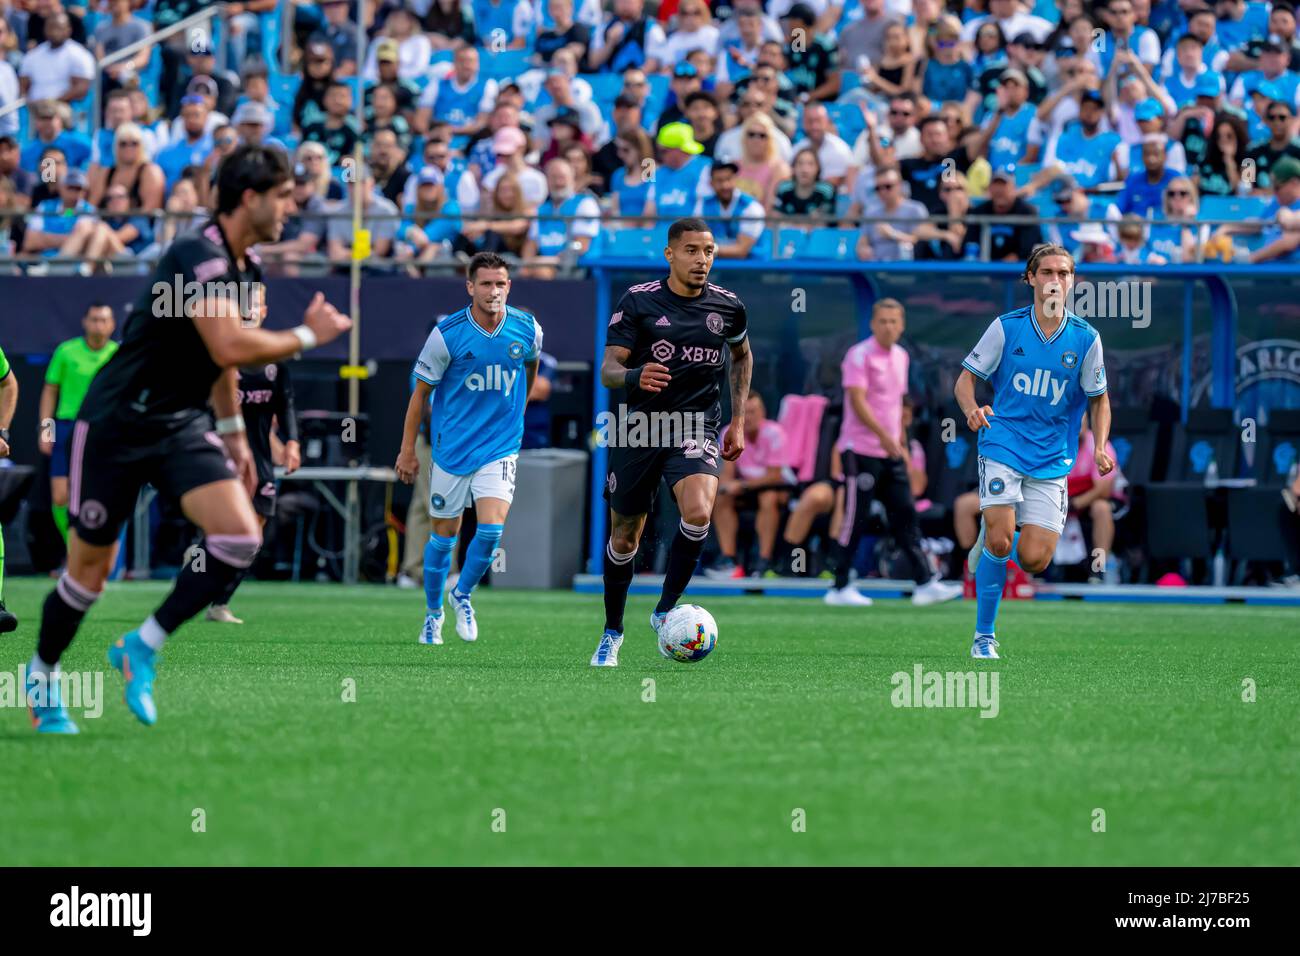 May 7, 2022, Charlotte, North Carolina, United States of America: Inter Miami Midfielder GREGORE of Brazil plays against the Inter Miami at the Bank of America Stadium in Charlotte, North Carolina, USA.  The Charlotte FC club wins the match 1-0 in regulation play. (Credit Image: © Walter G. Arce Sr./ZUMA Press Wire) Stock Photo